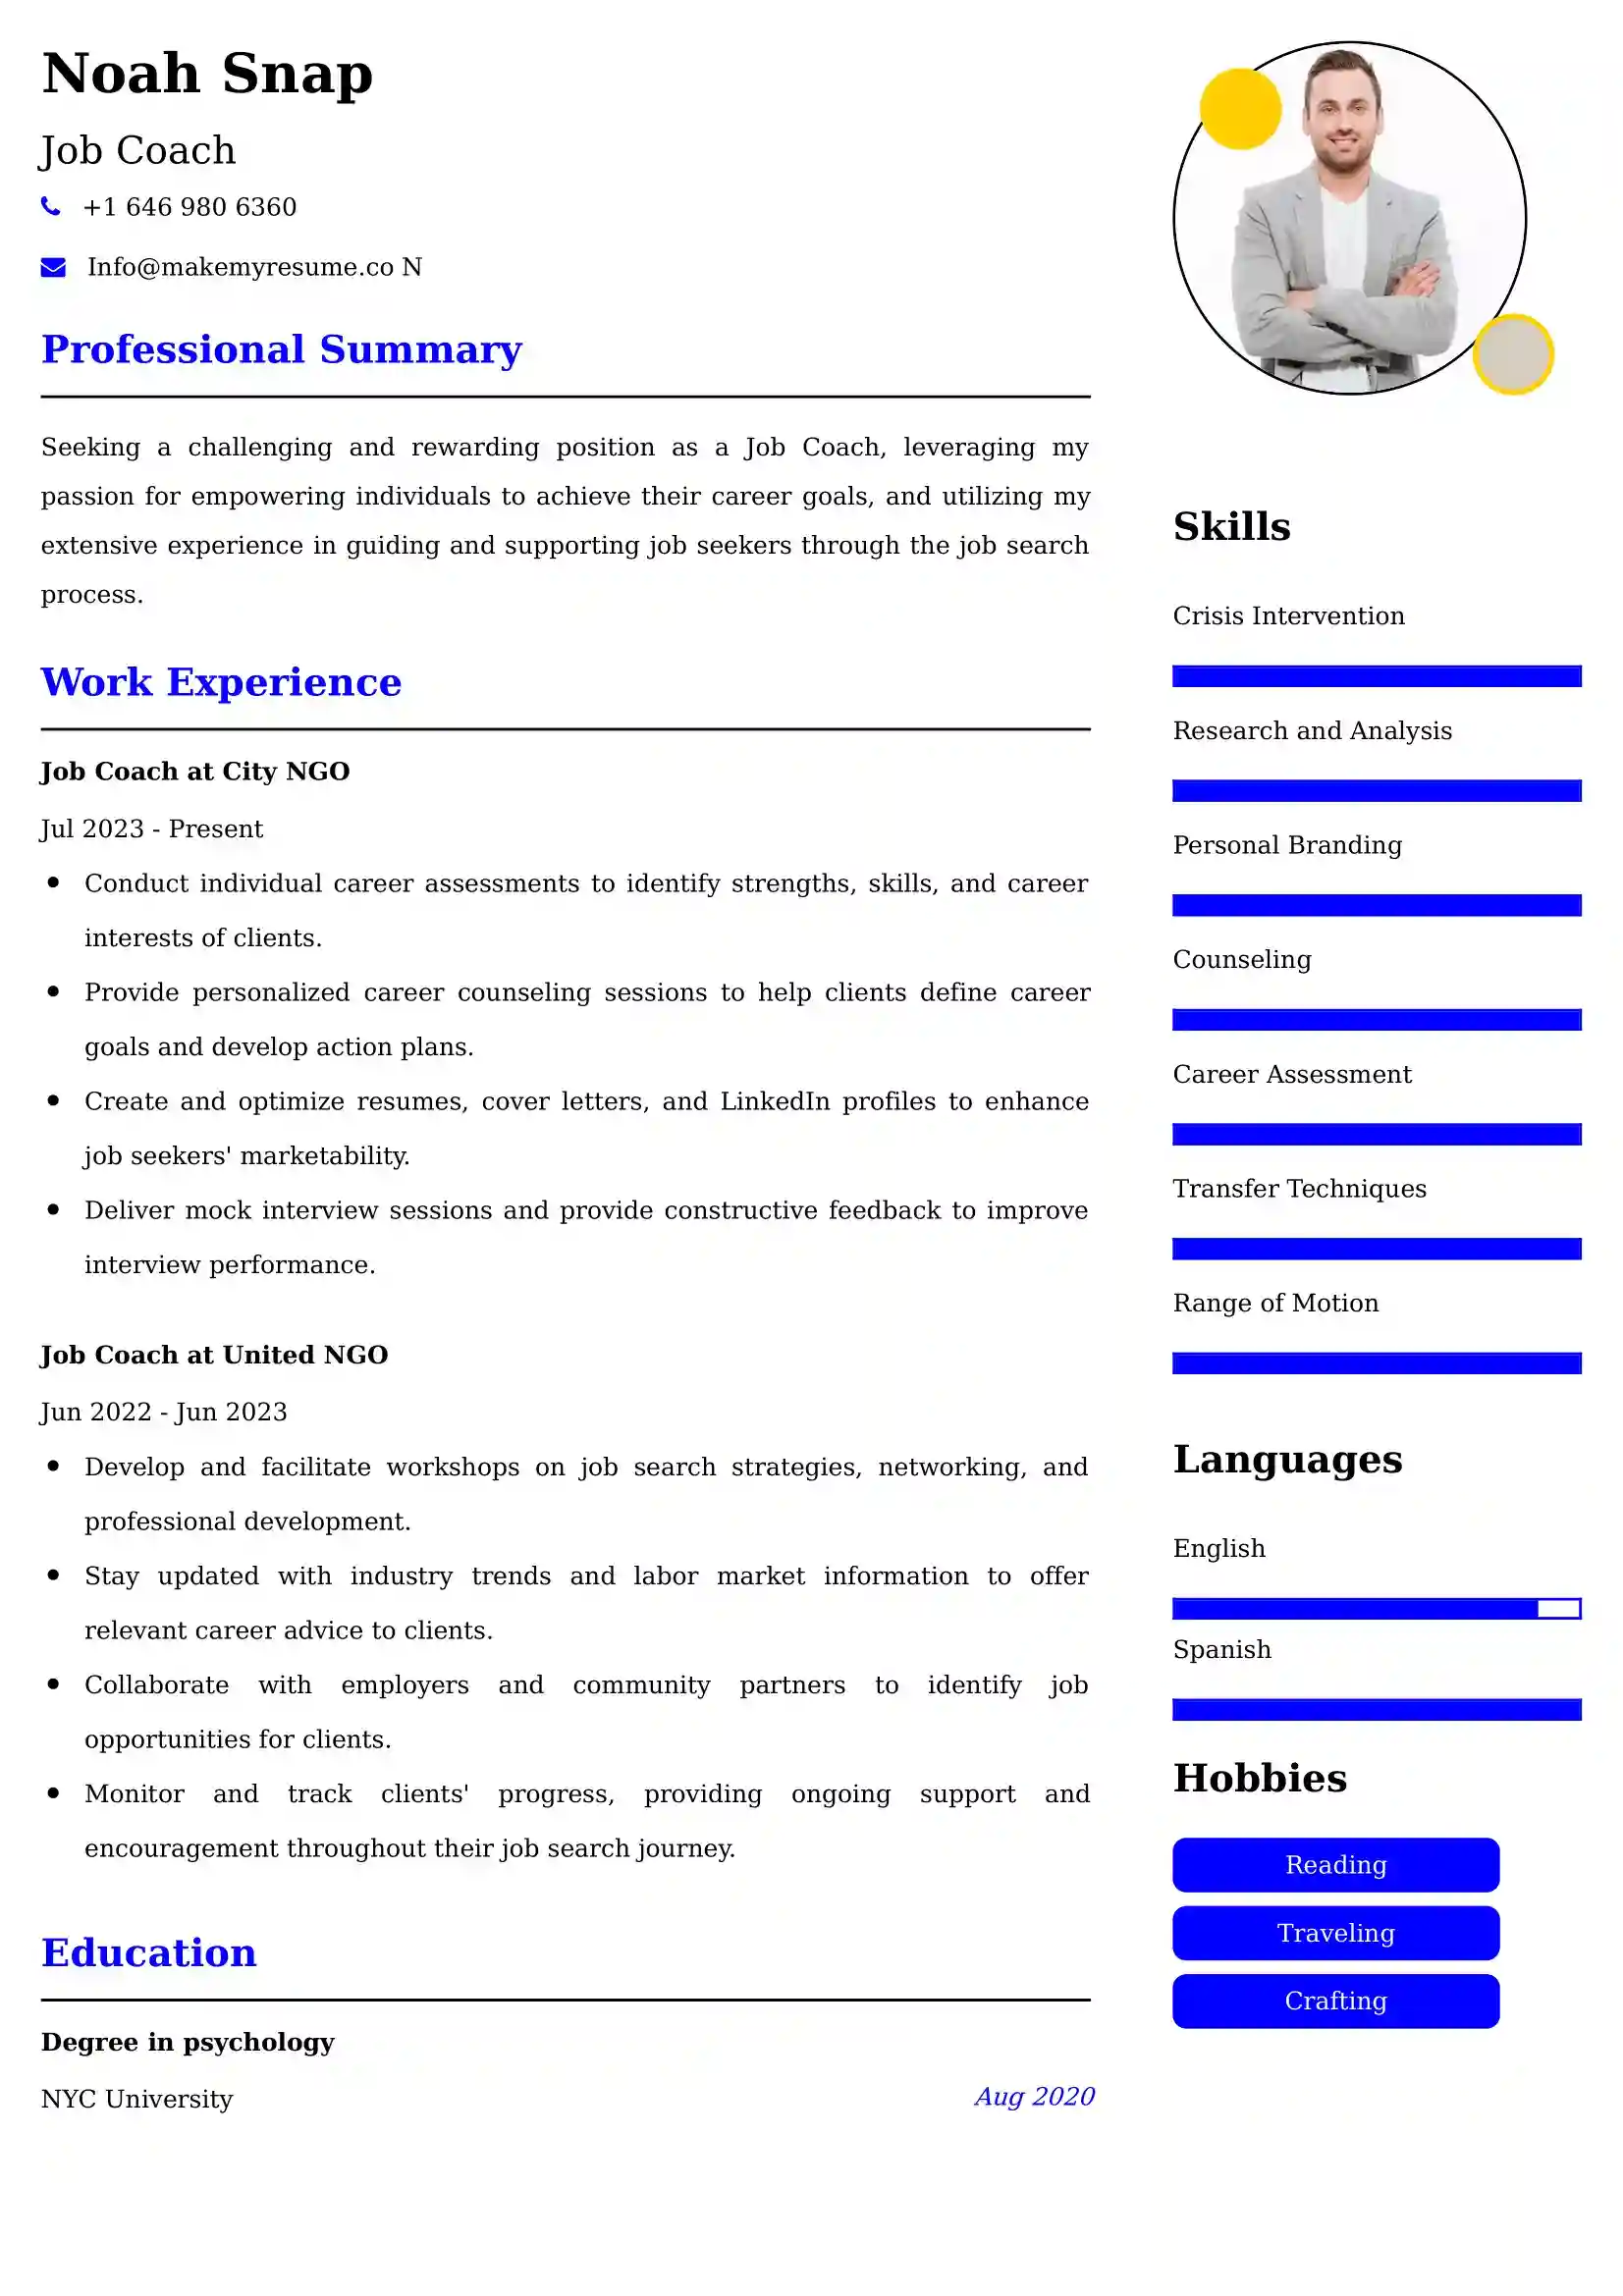 Job Coach Resume Examples - Australian Format and Tips